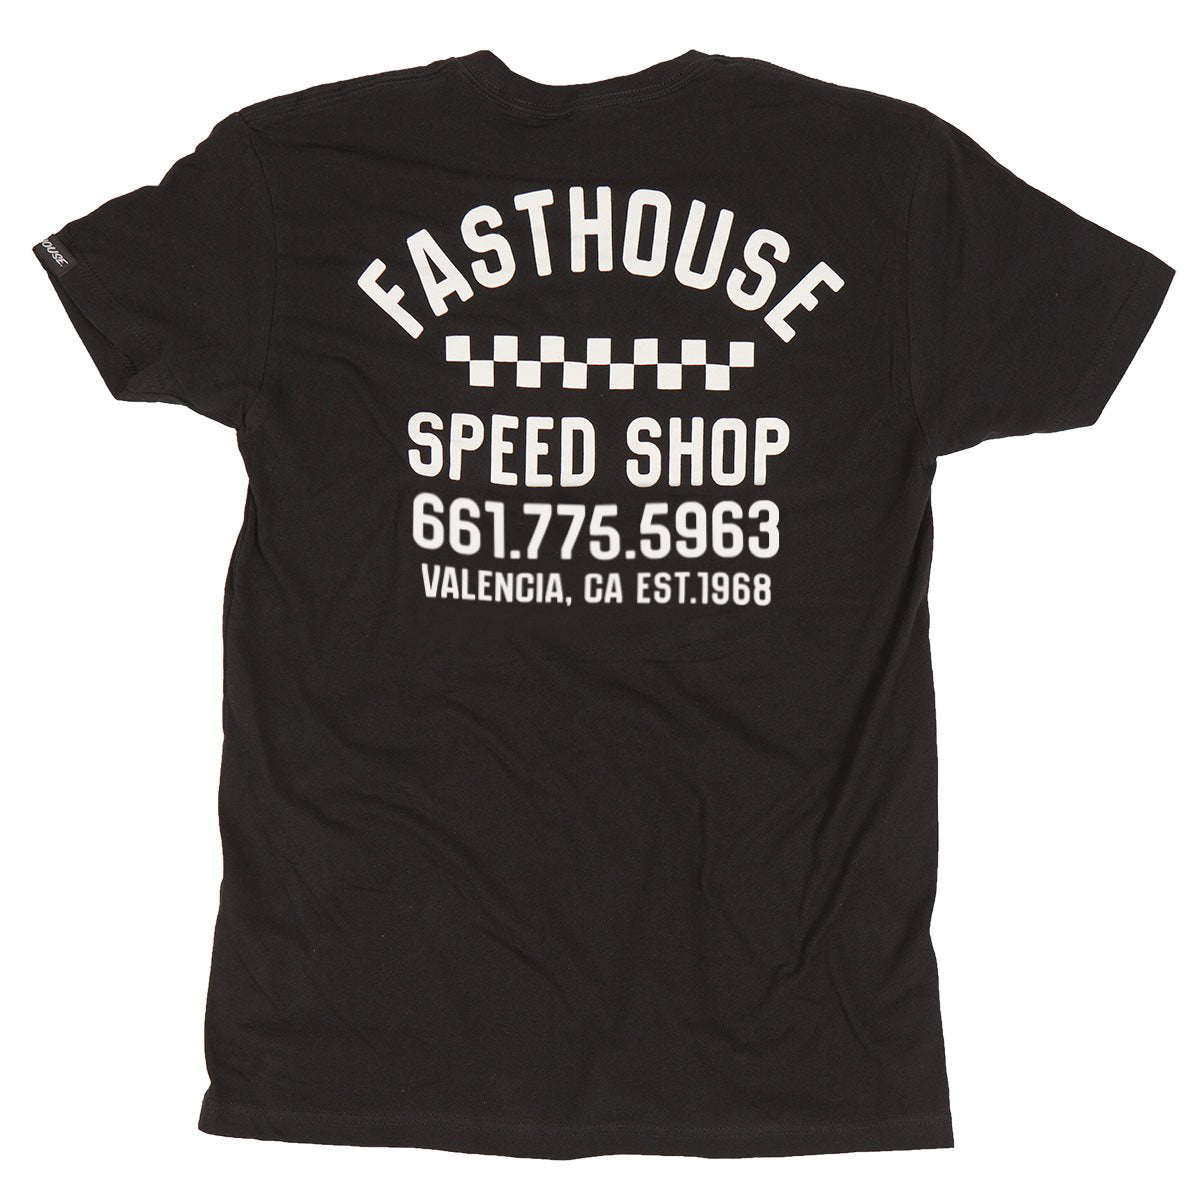 Fasthouse - Service Tee - Black